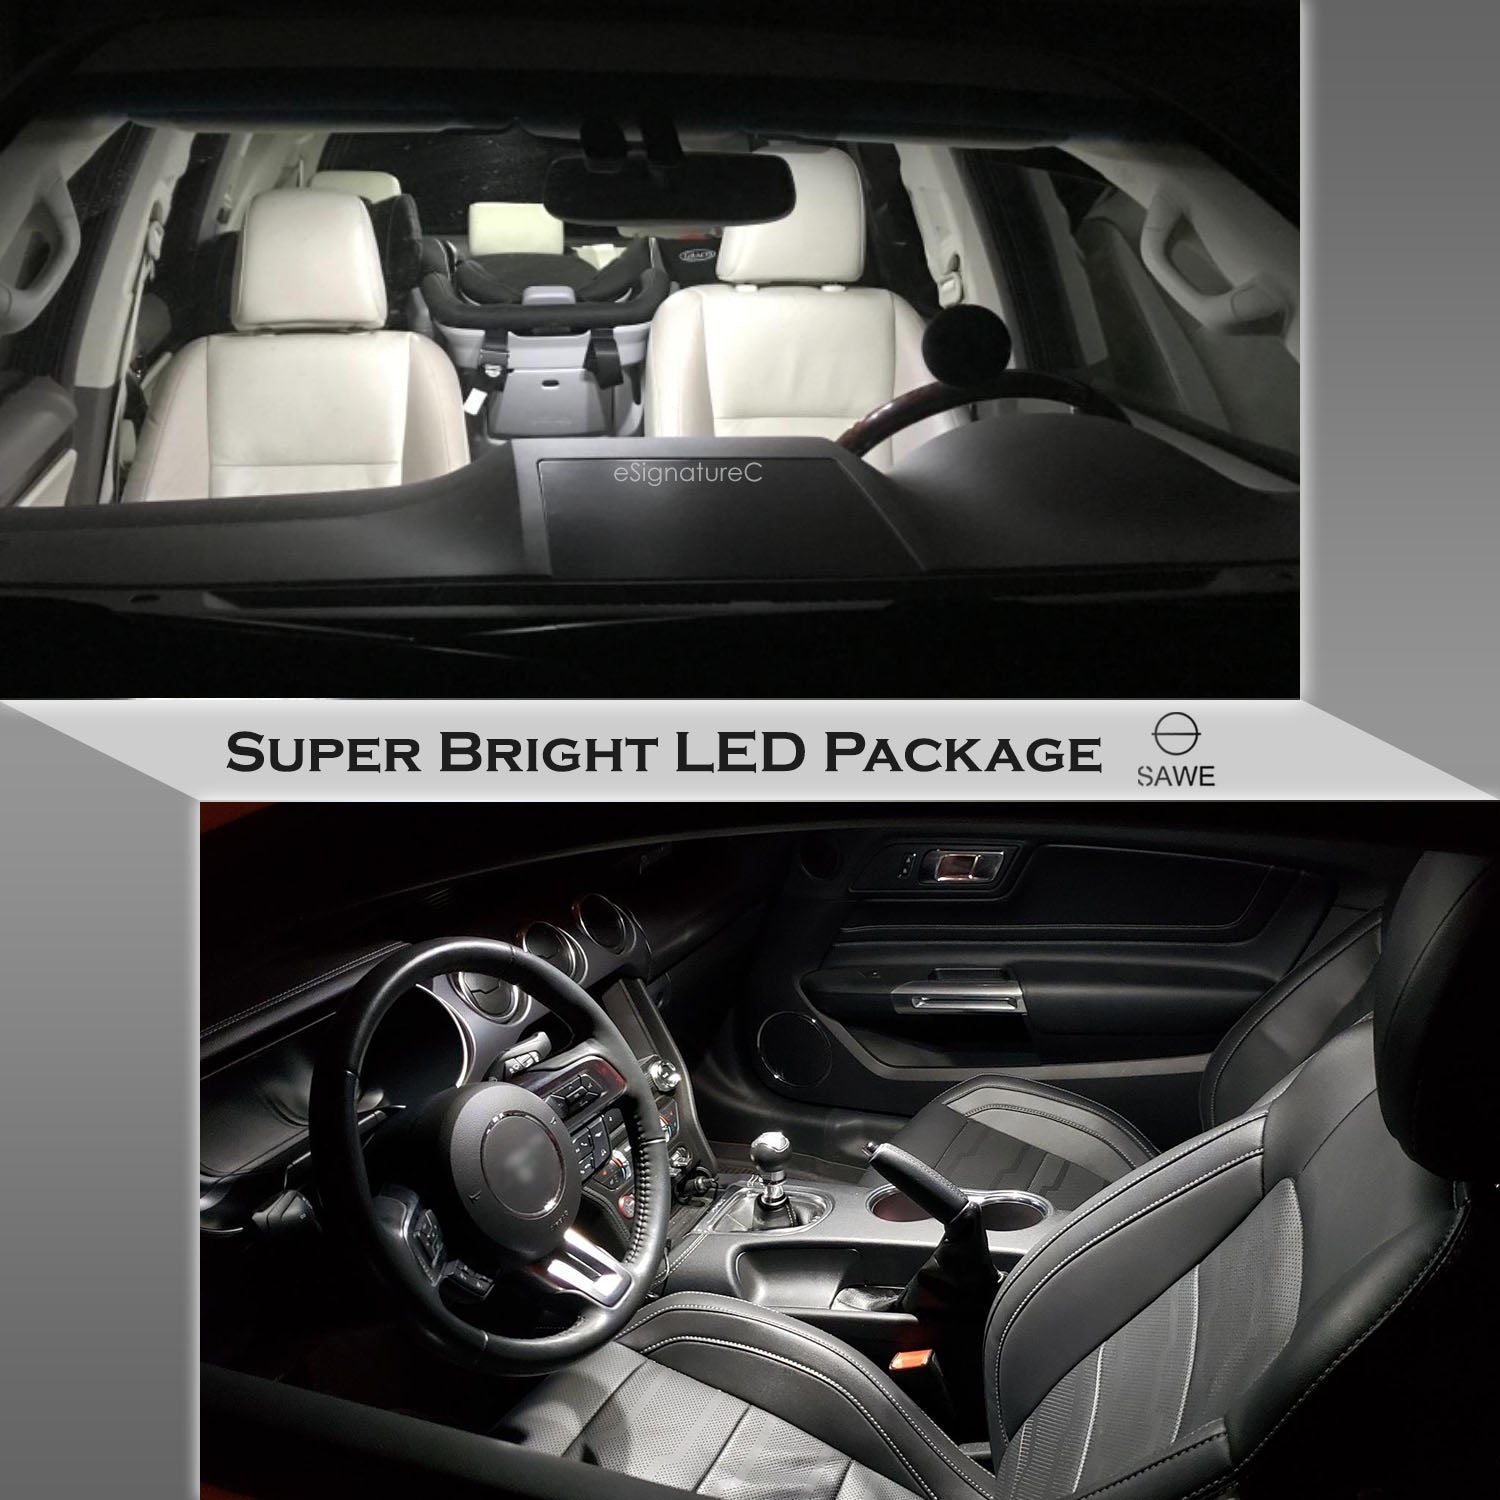 For Toyota Corolla Interior LED Lights - Dome & Map Lights Package Kit for 1998 - 2000 - White